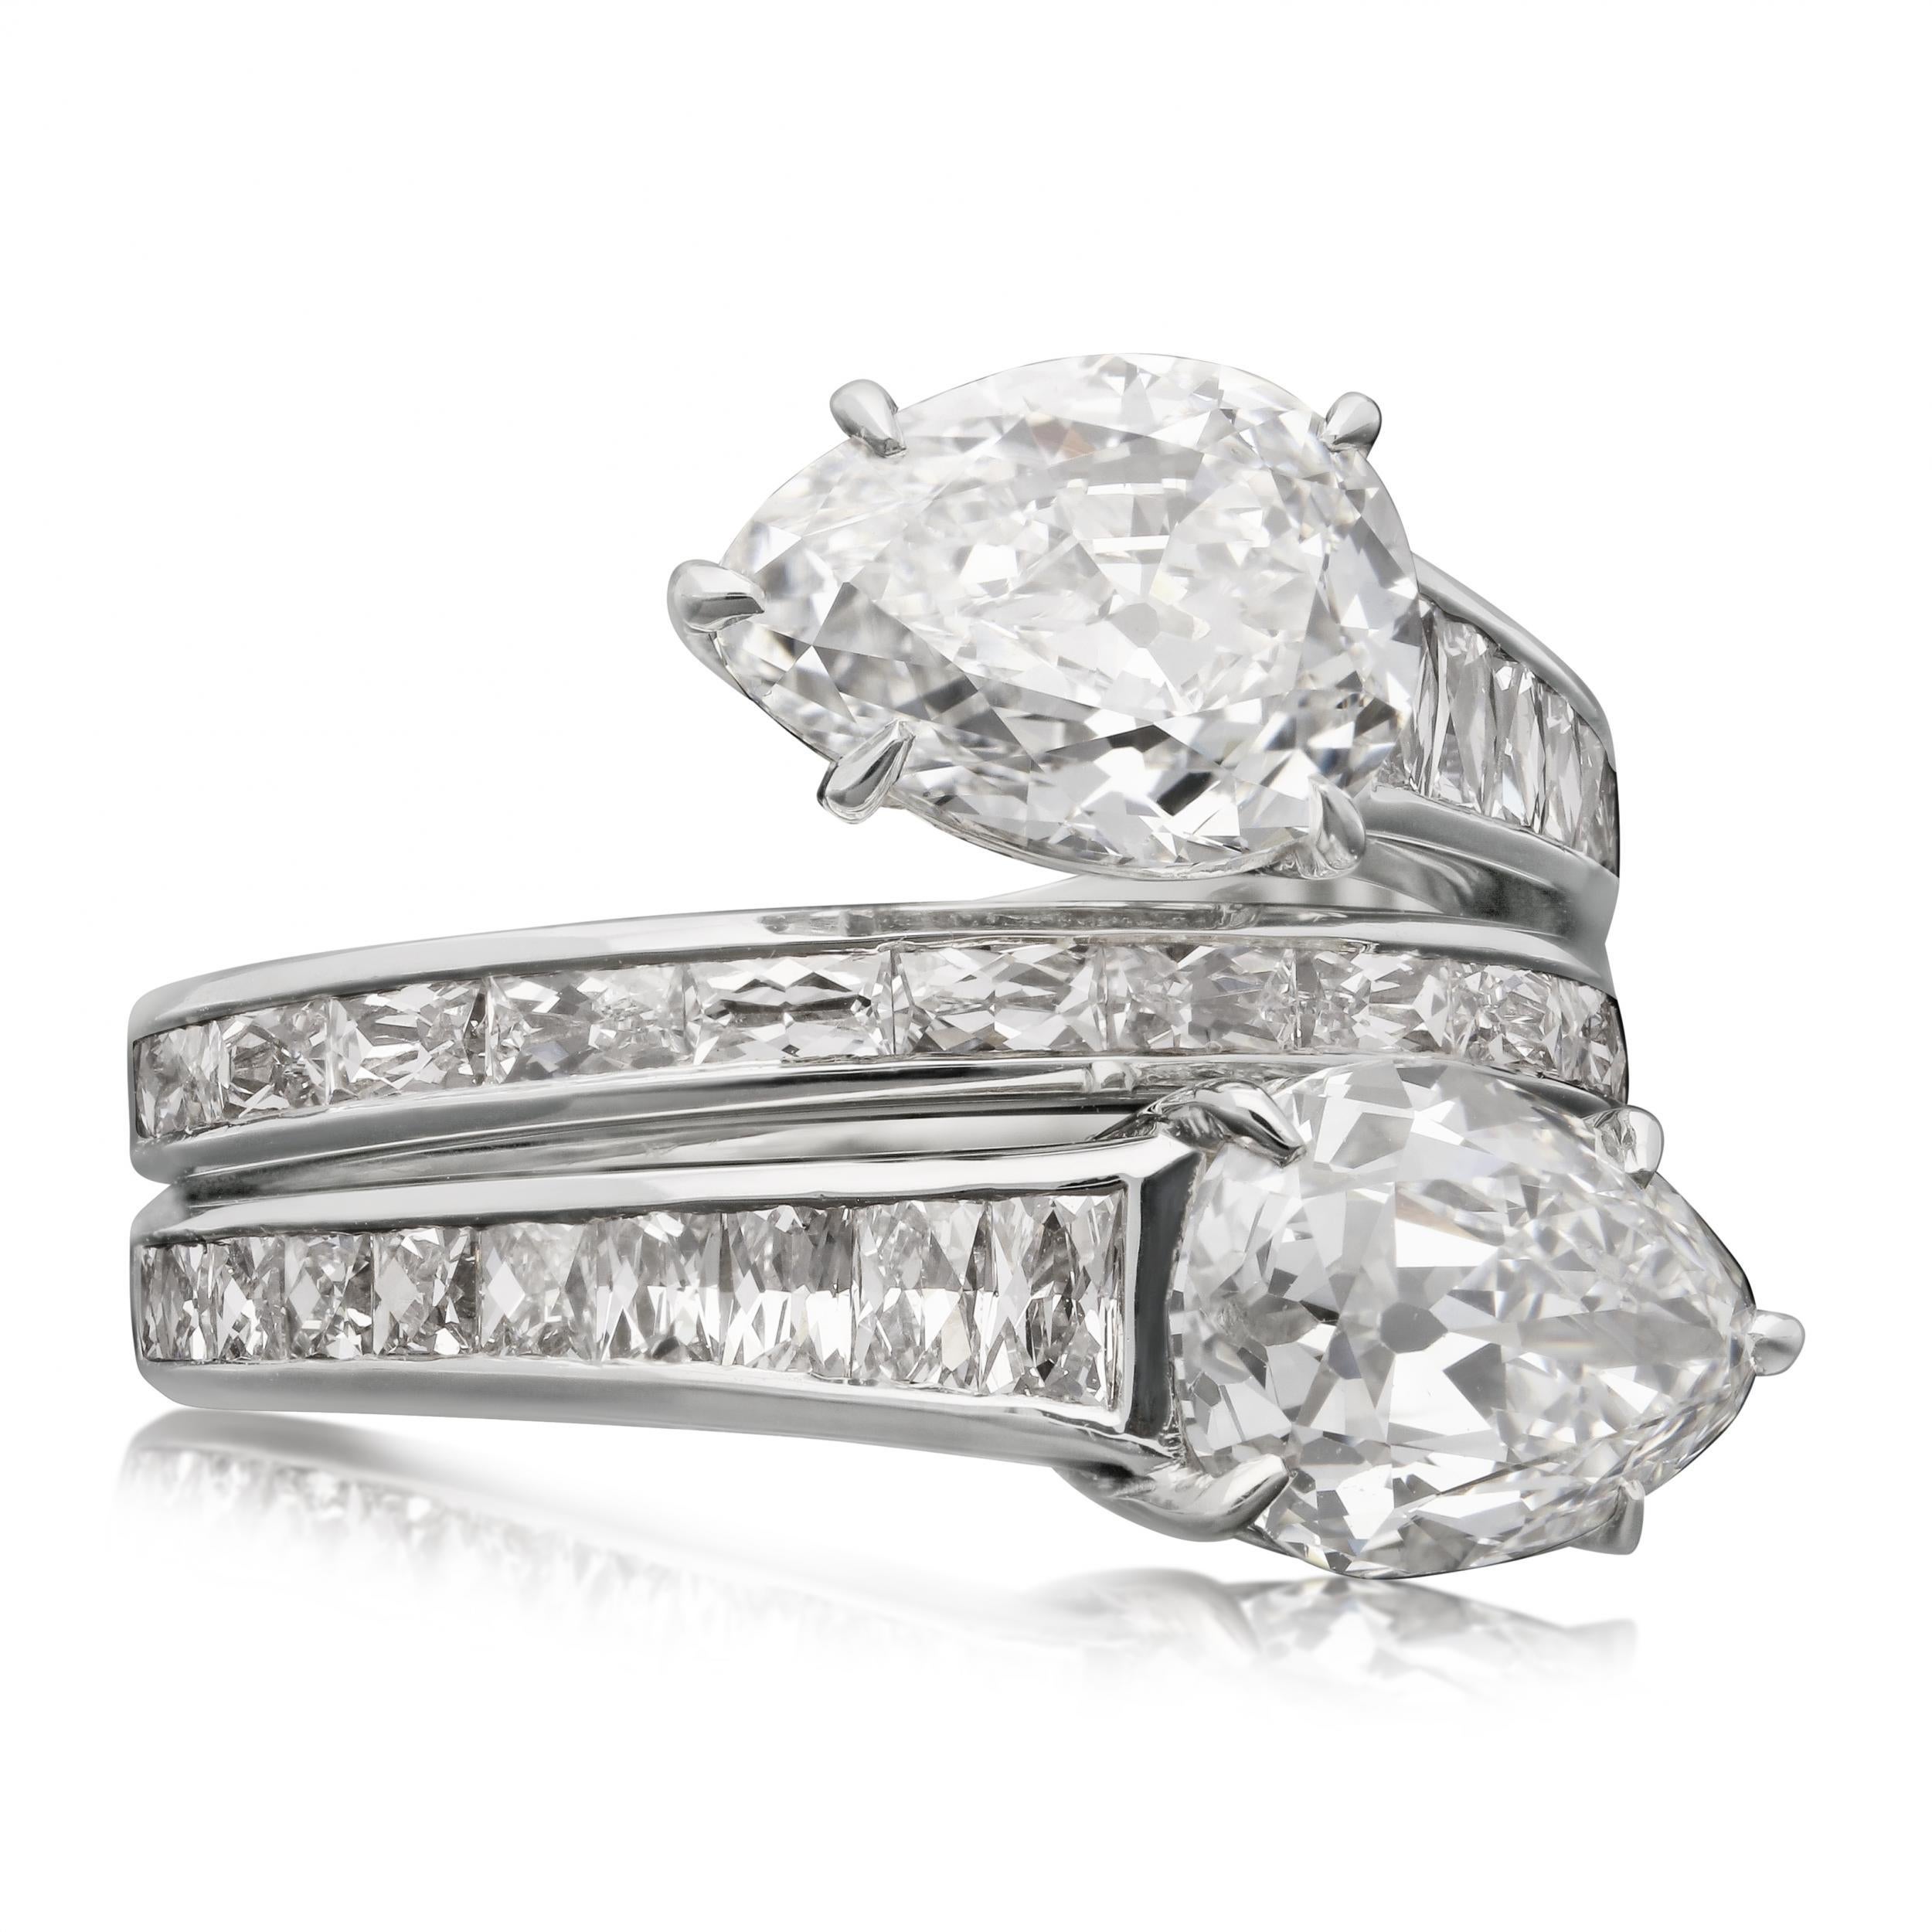 Description
A stunning old cut pear shaped diamond cross over ring by Hancocks, the double wrap-around band finely hand crafted in platinum and set with calibre-cut French cut diamonds in a channel setting, the outer edges set with a row of round